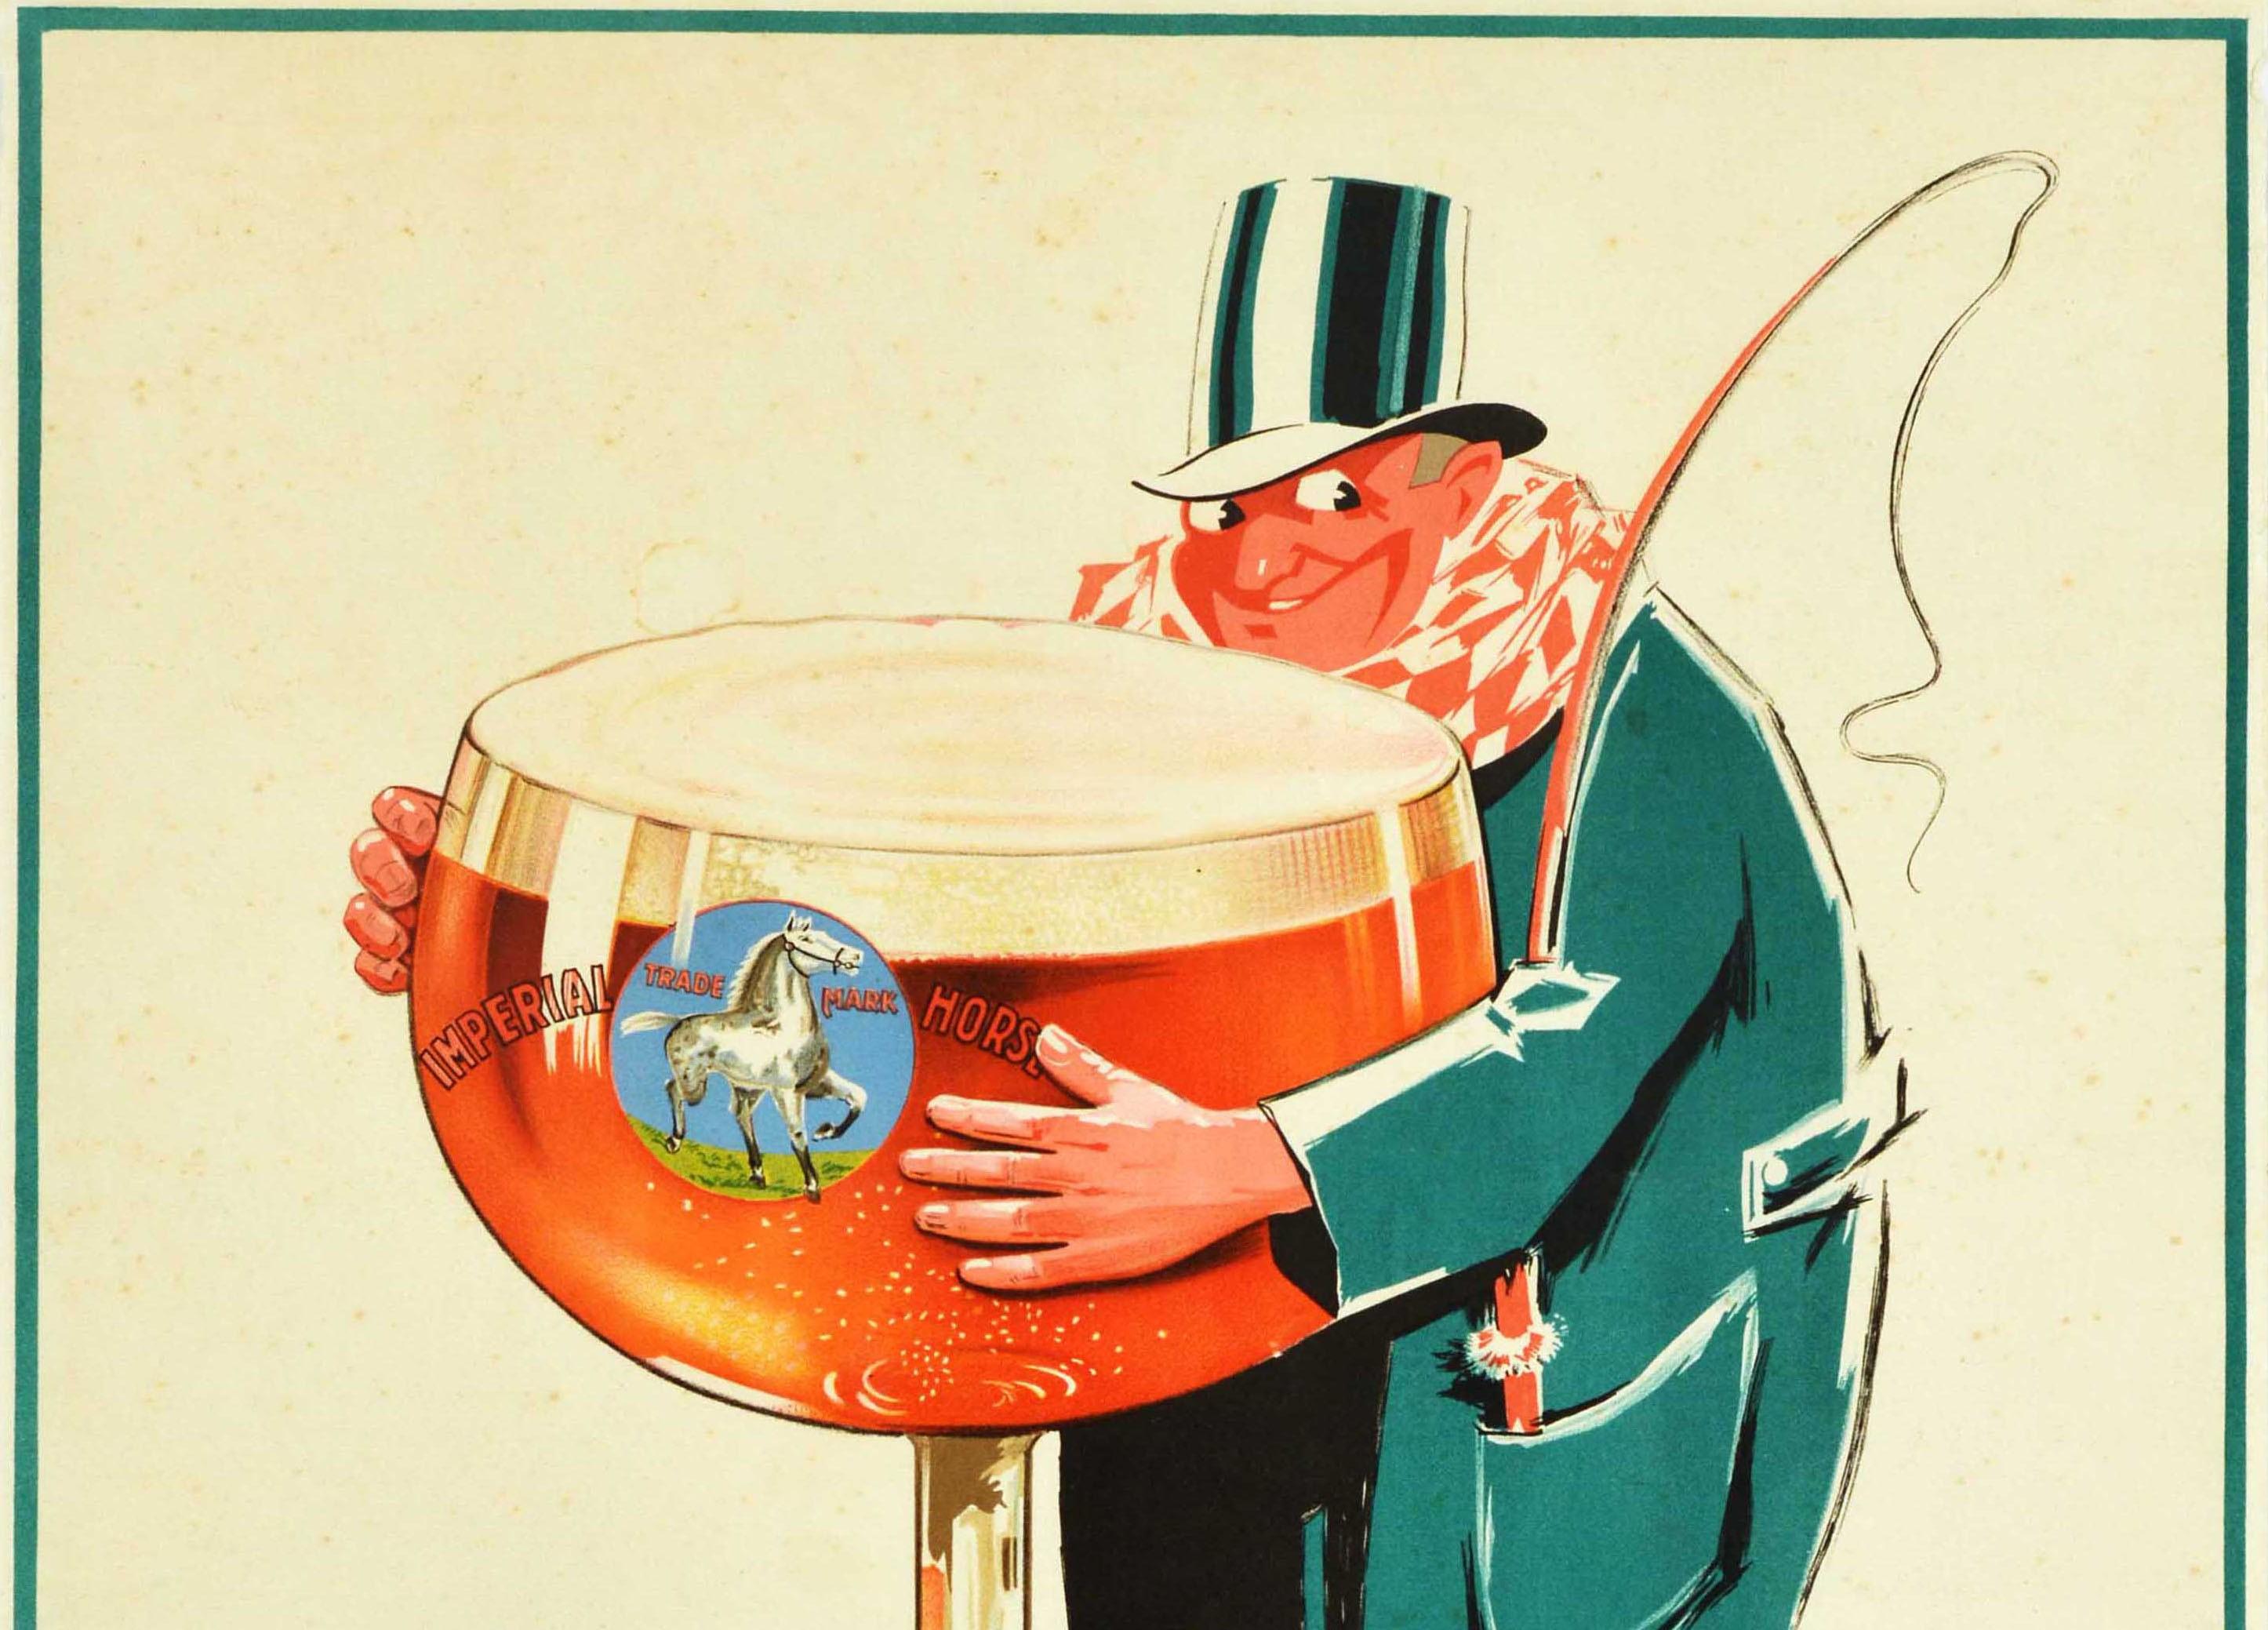 Original vintage beer drink poster advertising Horse Ale Imperial featuring a fun illustration of a smiling coachman dressed in a long green coat and top hat with a whip in his pocket, hugging a large Belgian goblet glass filled with beer, a logo of